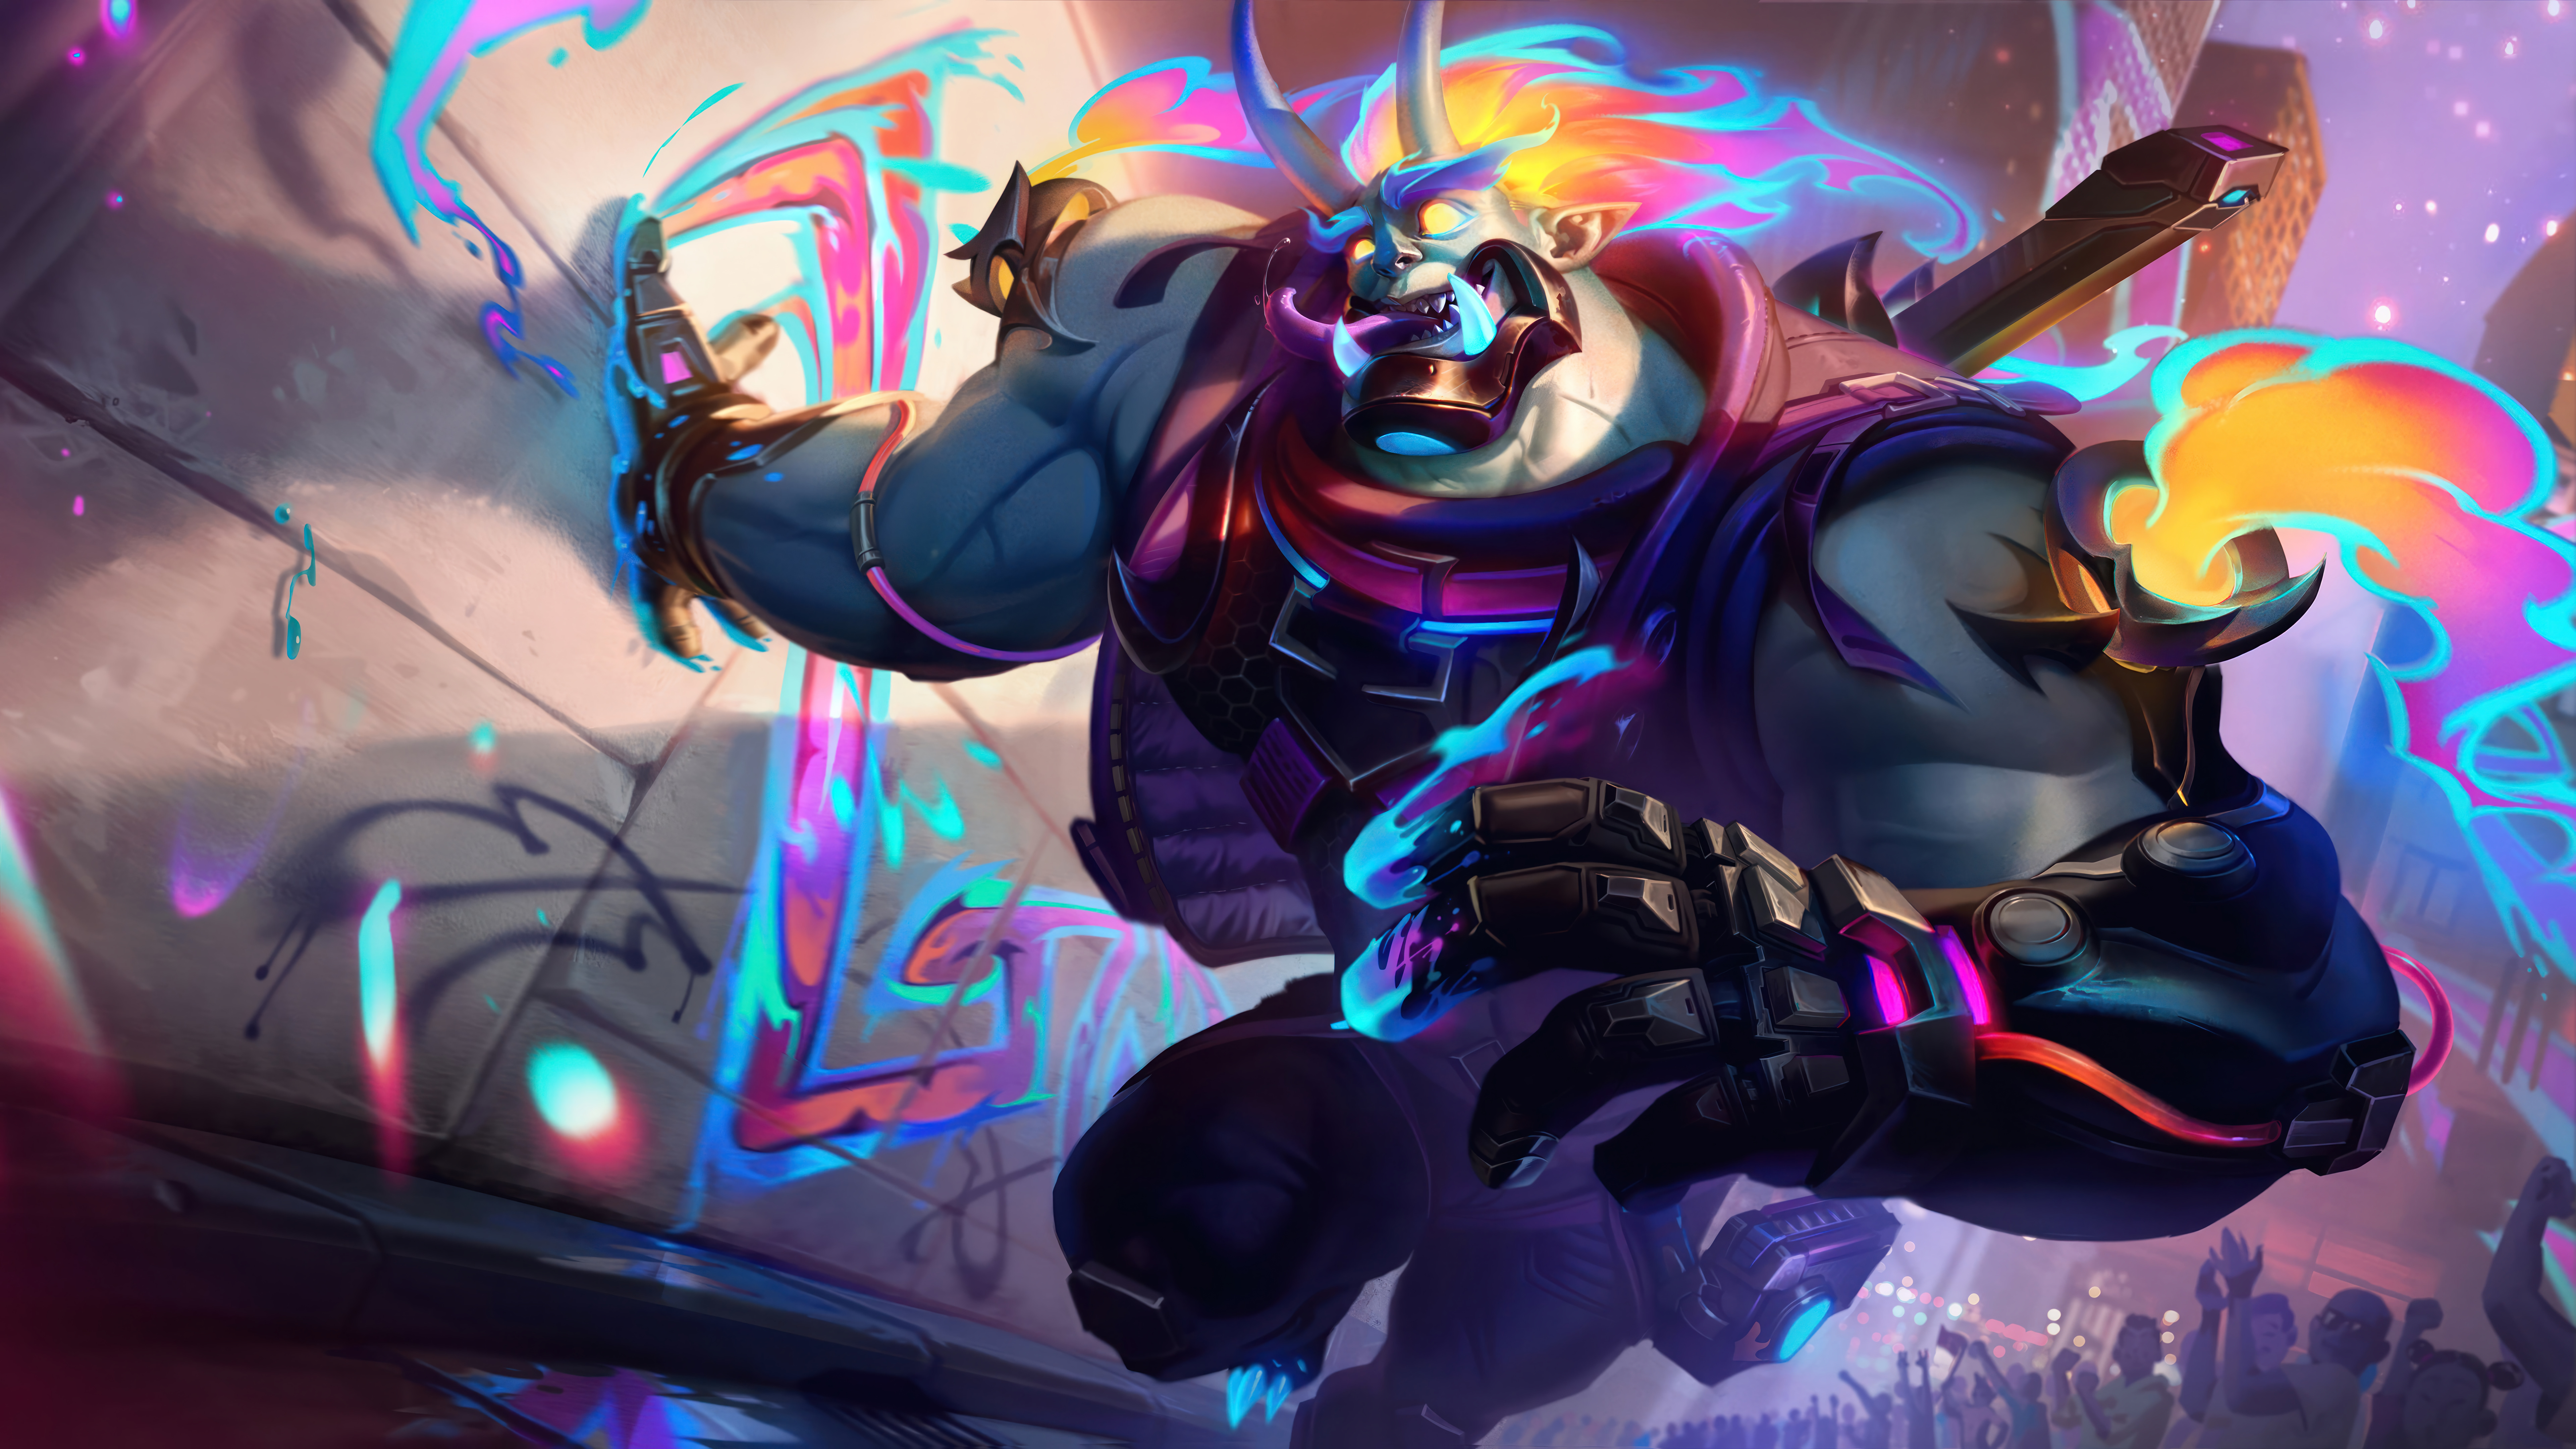 General 7680x4320 Street Demon (League of Legends) Dr. Mundo (League of Legends) League of Legends digital art Riot Games GZG 4K video games muscles video game characters video game art graffiti glowing eyes